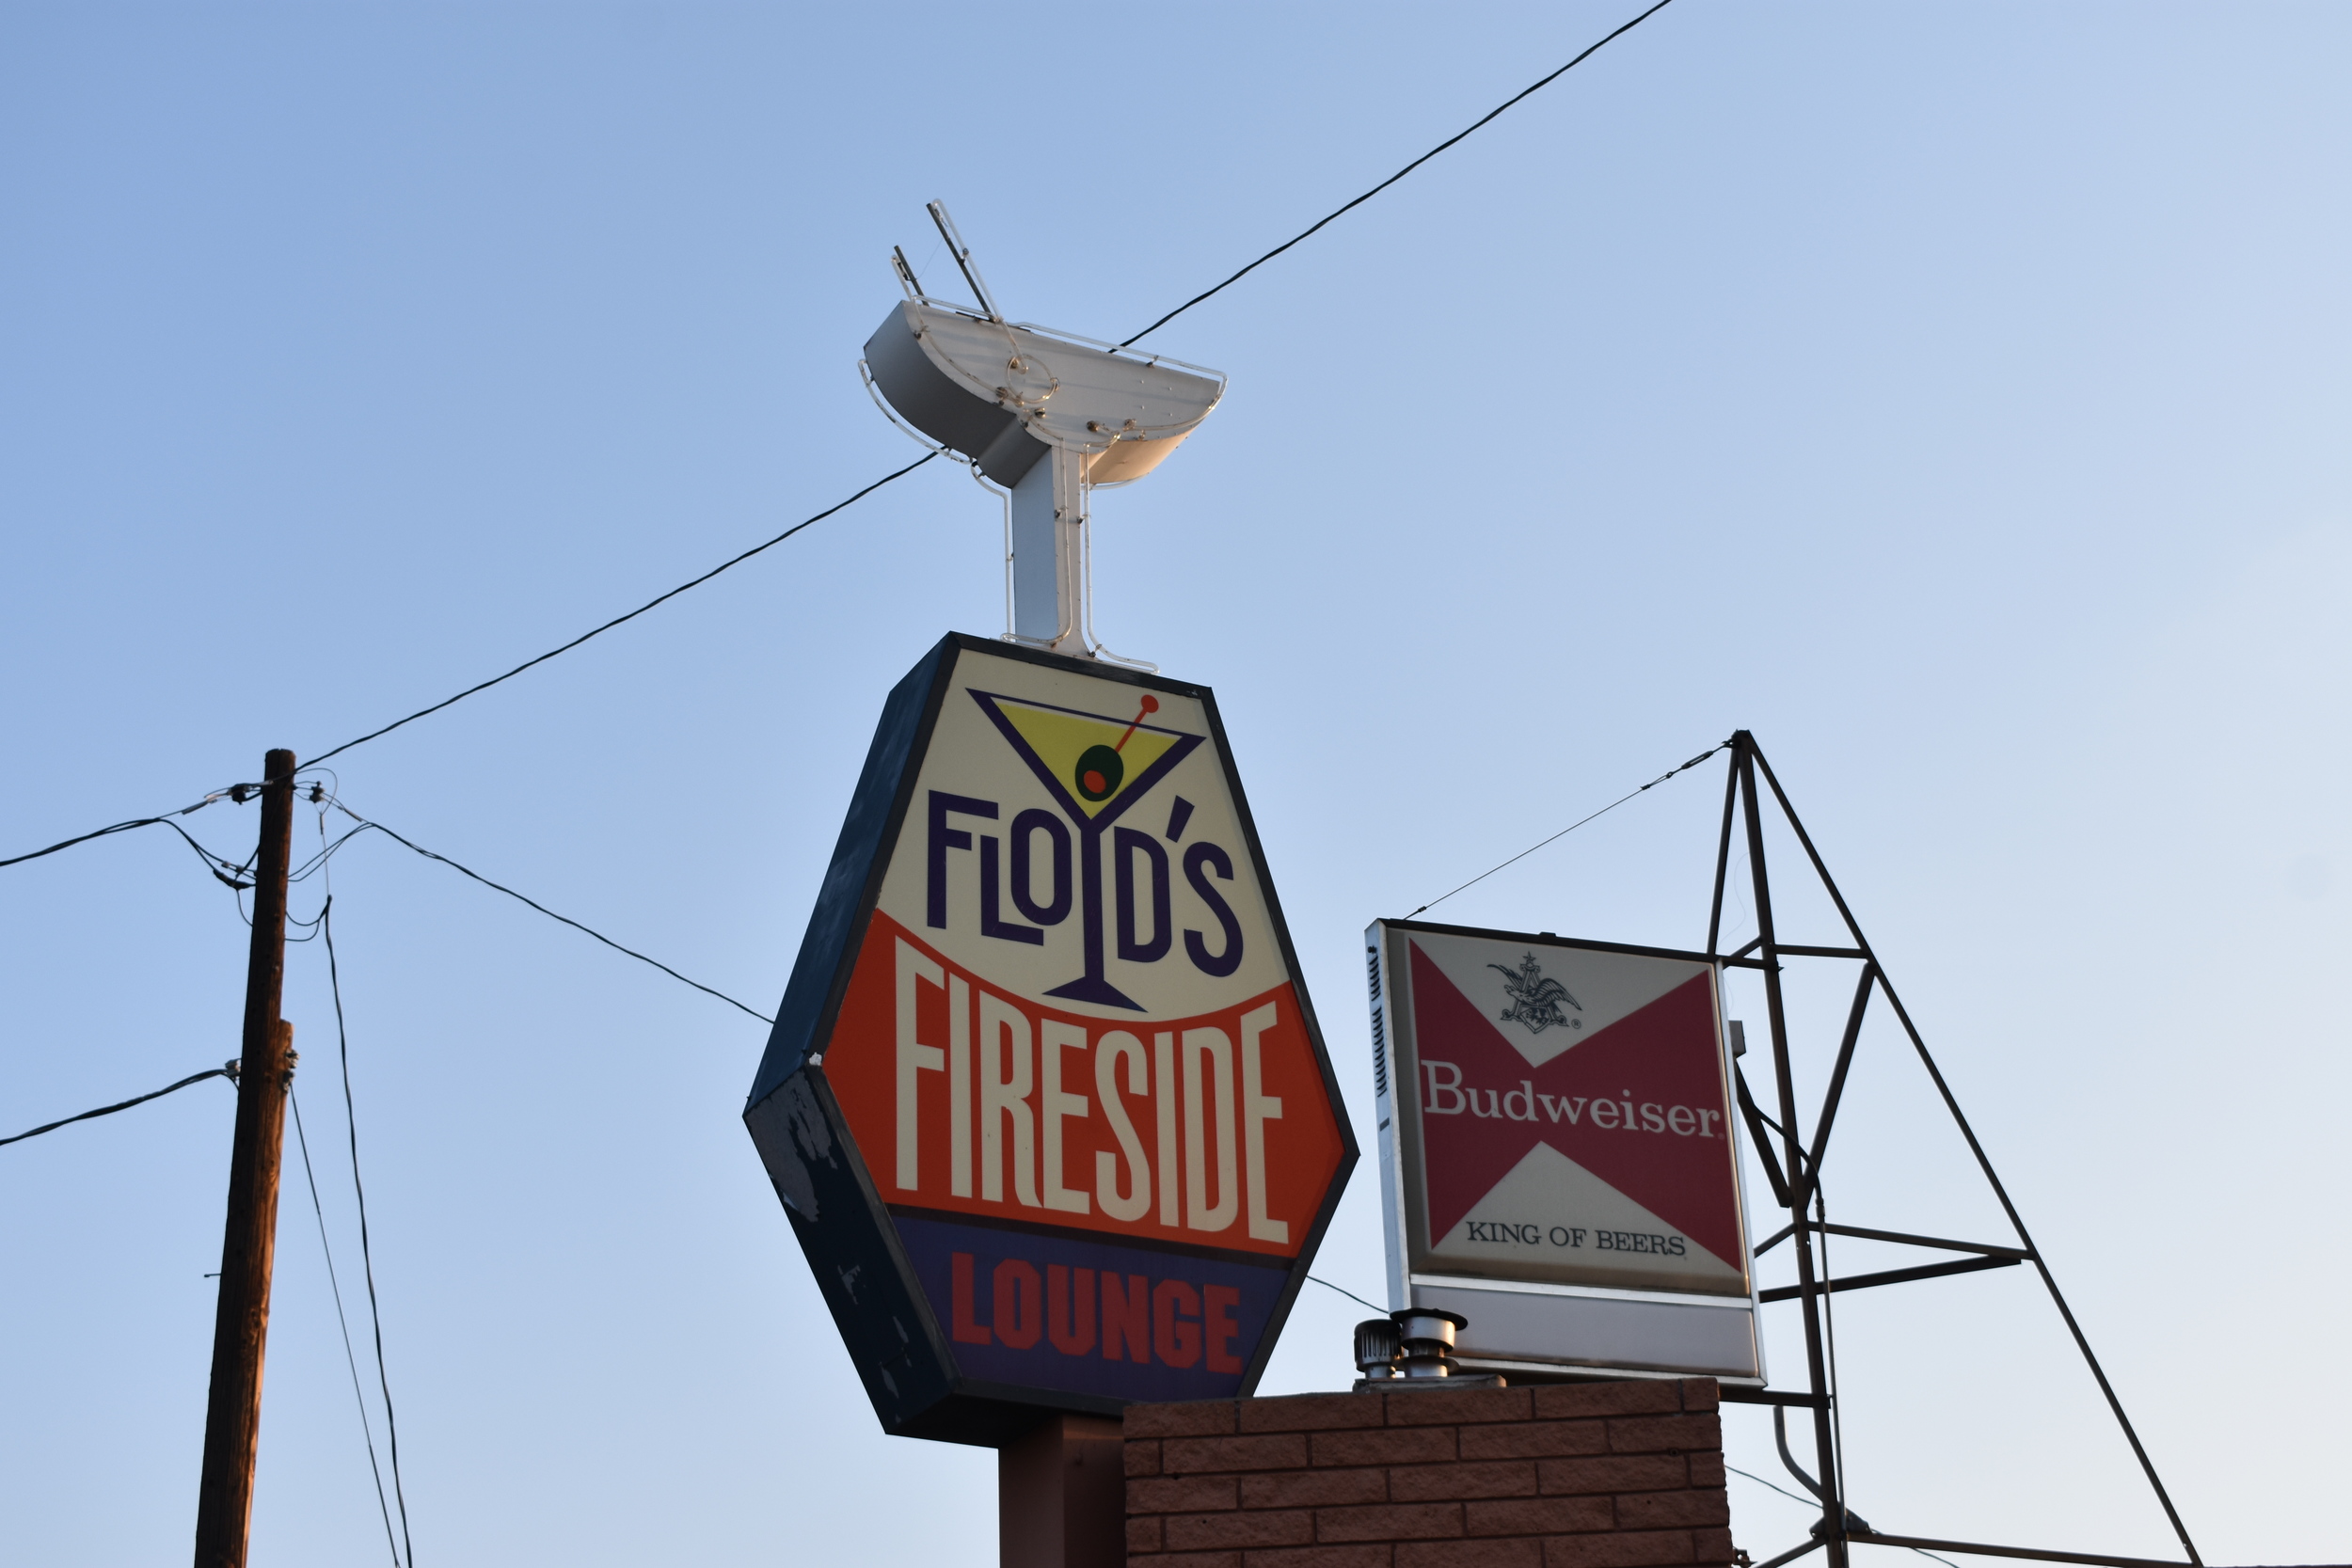 Floyd's Fireside Lounge roof mounted sign, Reno, Nevada